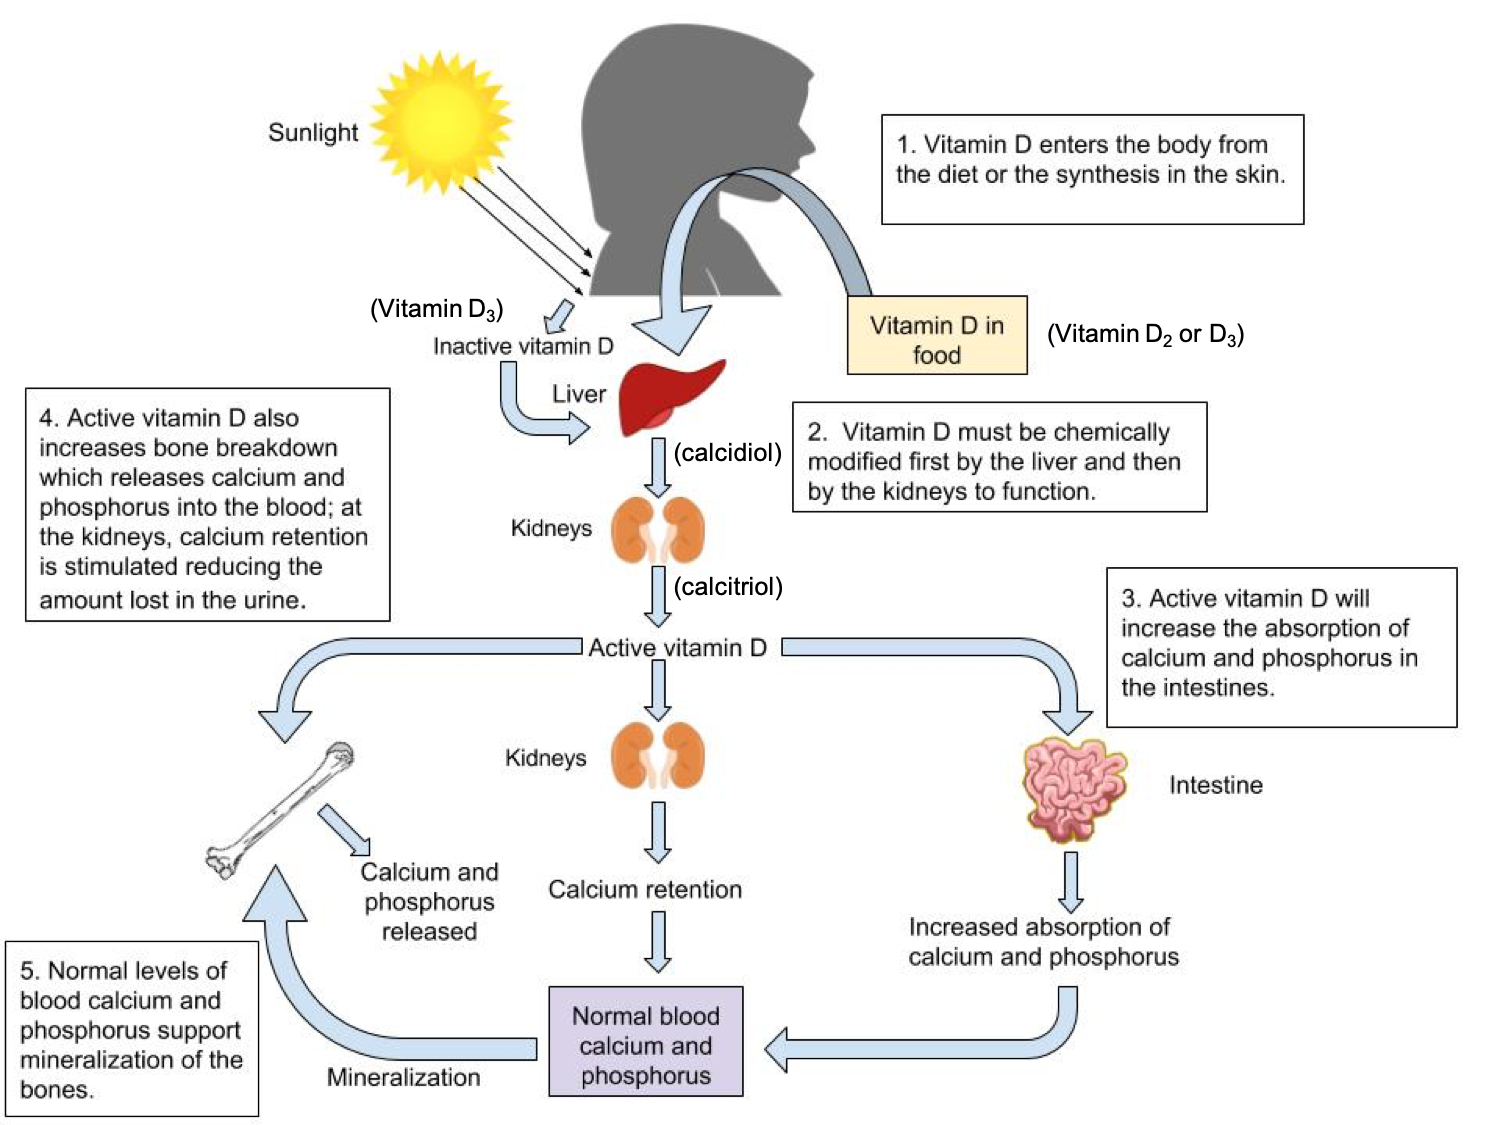 Vitamin D can be synthesized in the skin (vitamin D3) or provided in the diet (vitamin D2 or D3). It is converted by reactions occurring first in the liver (making calcidiol) and then kidney (making calcitriol, the active form). Once active, vitamin D works in several ways to ensure blood calcium homeostasis and enhance the availability of calcium for bone mineralization. Active vitamin D will increase the absorption of calcium and phosphorus in the intestines. It also increasers bone breakdown which releases calcium and phosphorus into the blood; at the kidneys calcium retention is stimulated reducing the amount lost in the urine. Normal levels of blood calcium and phosphorus support mineralization of the bones